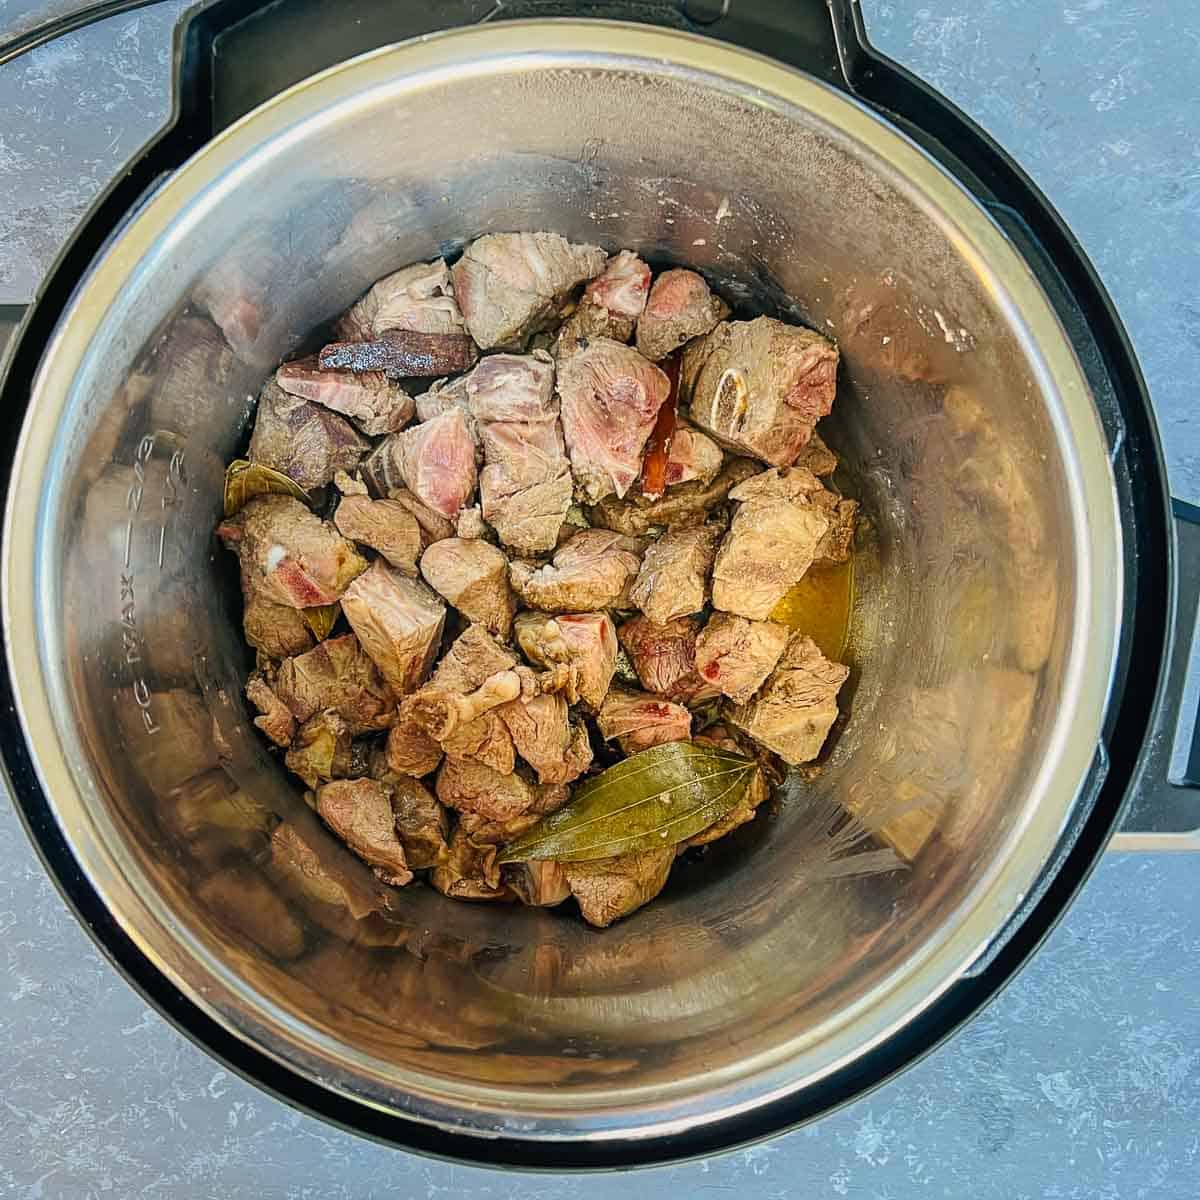 Browned lamb pieces in the Instant Pot.